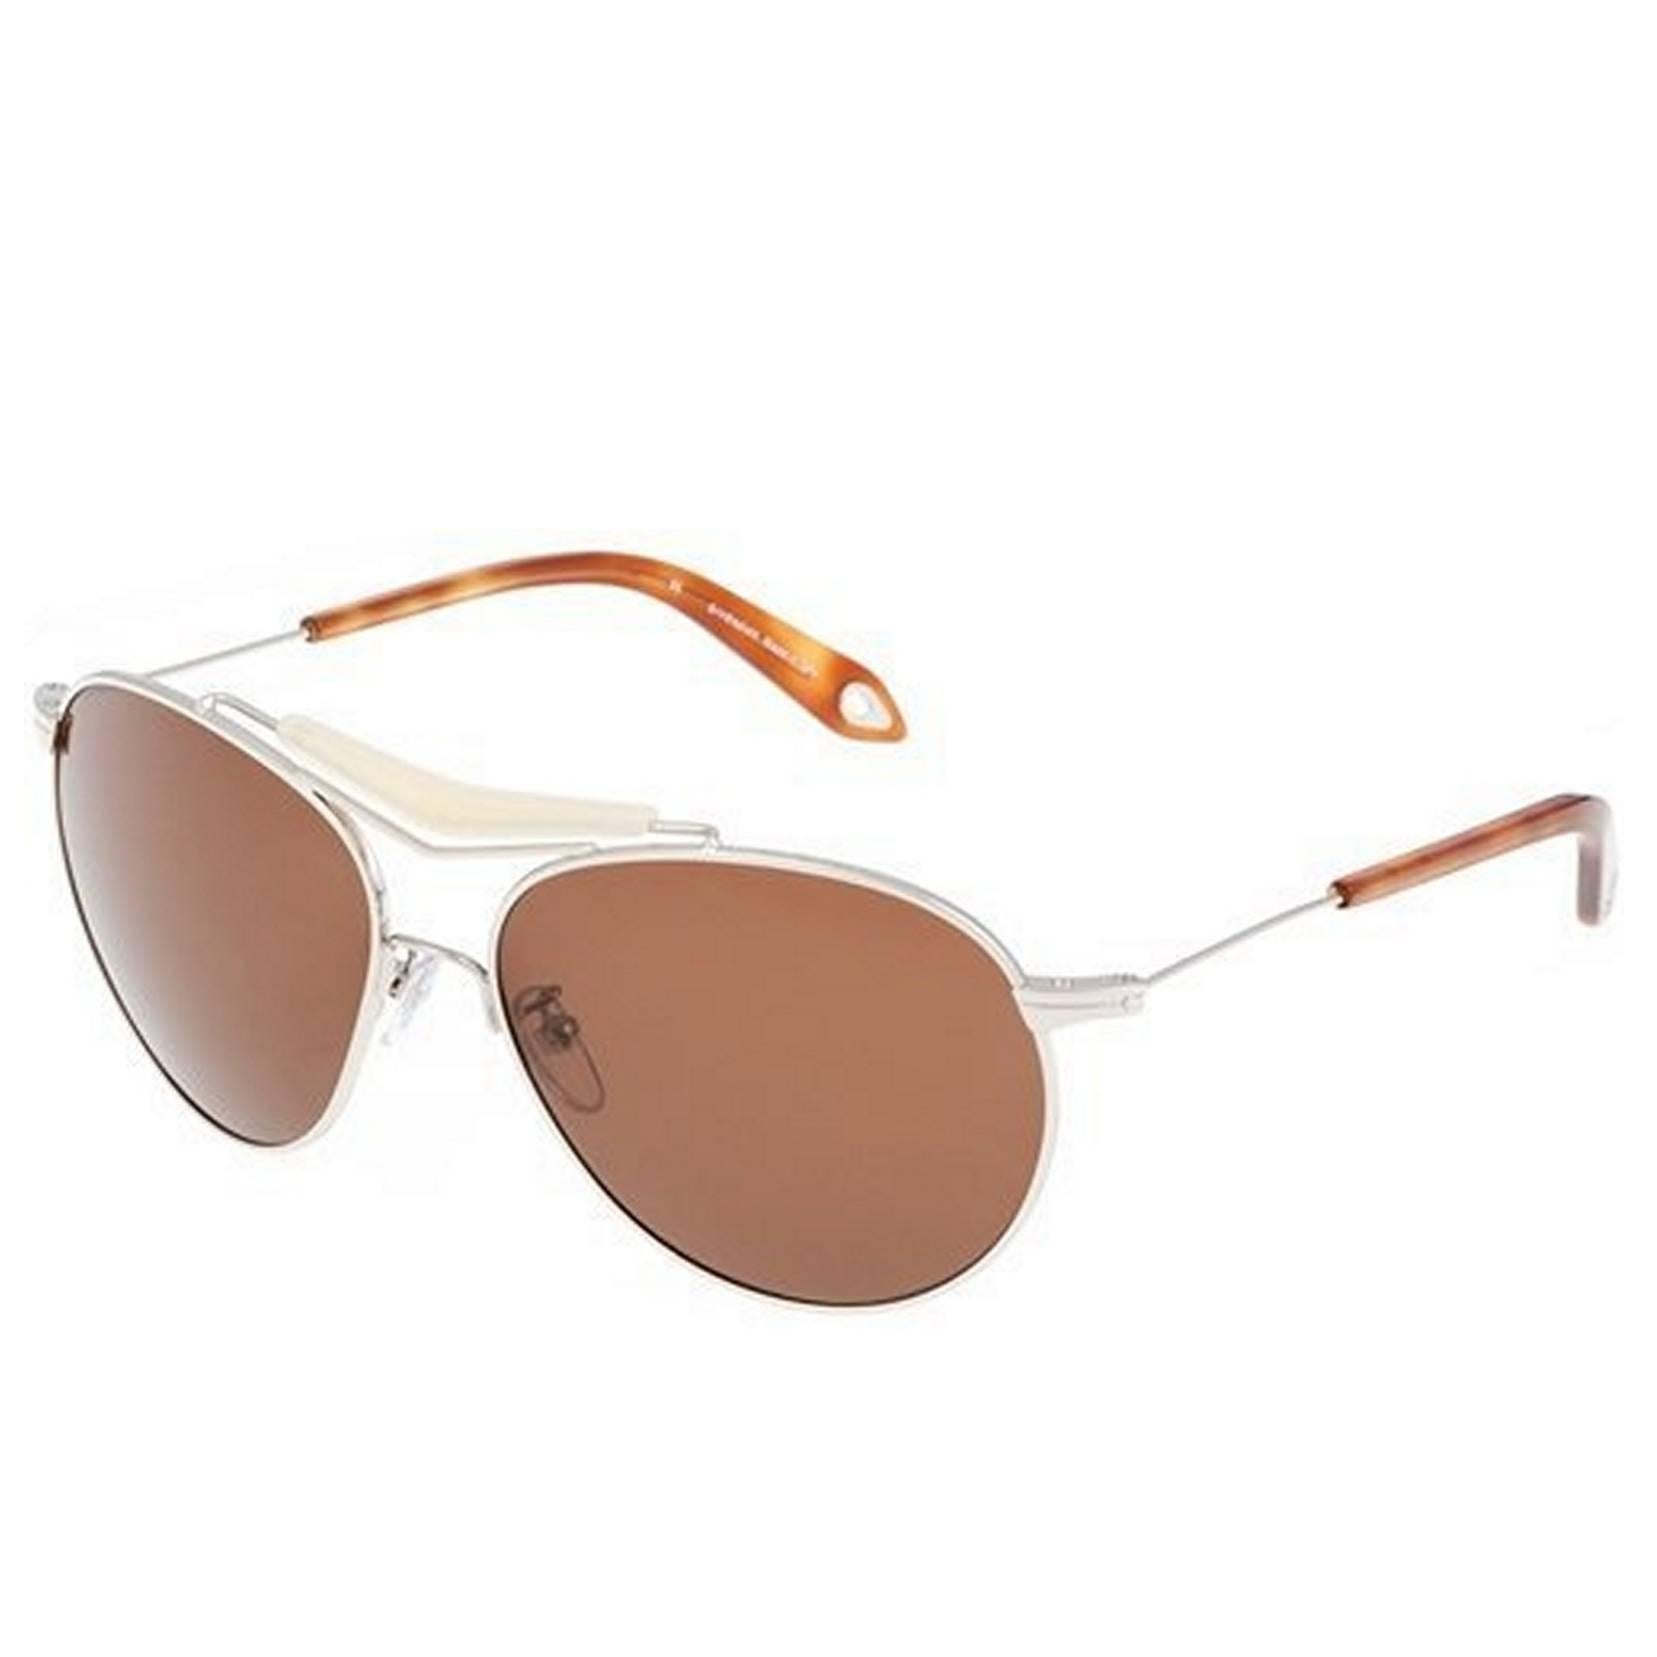 Givenchy SGVA49 0579 Sunglasses For Sale